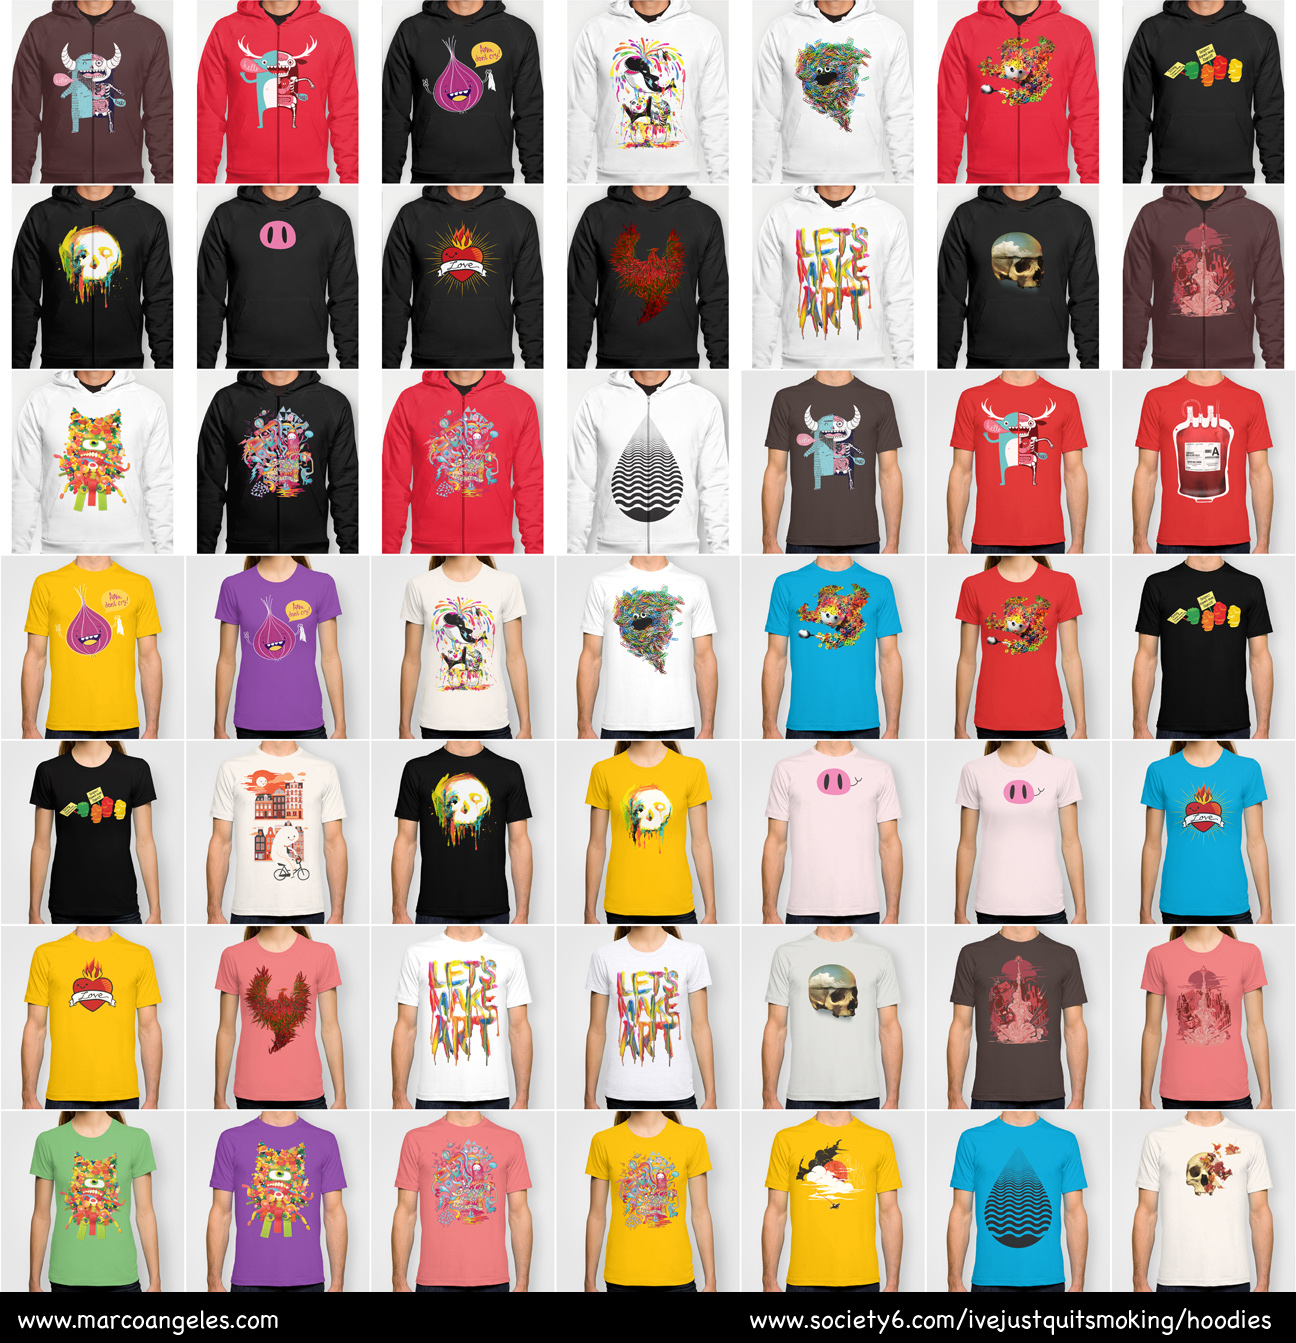 marcoangeles.com » Hoodies and Colored Tees at Society6!